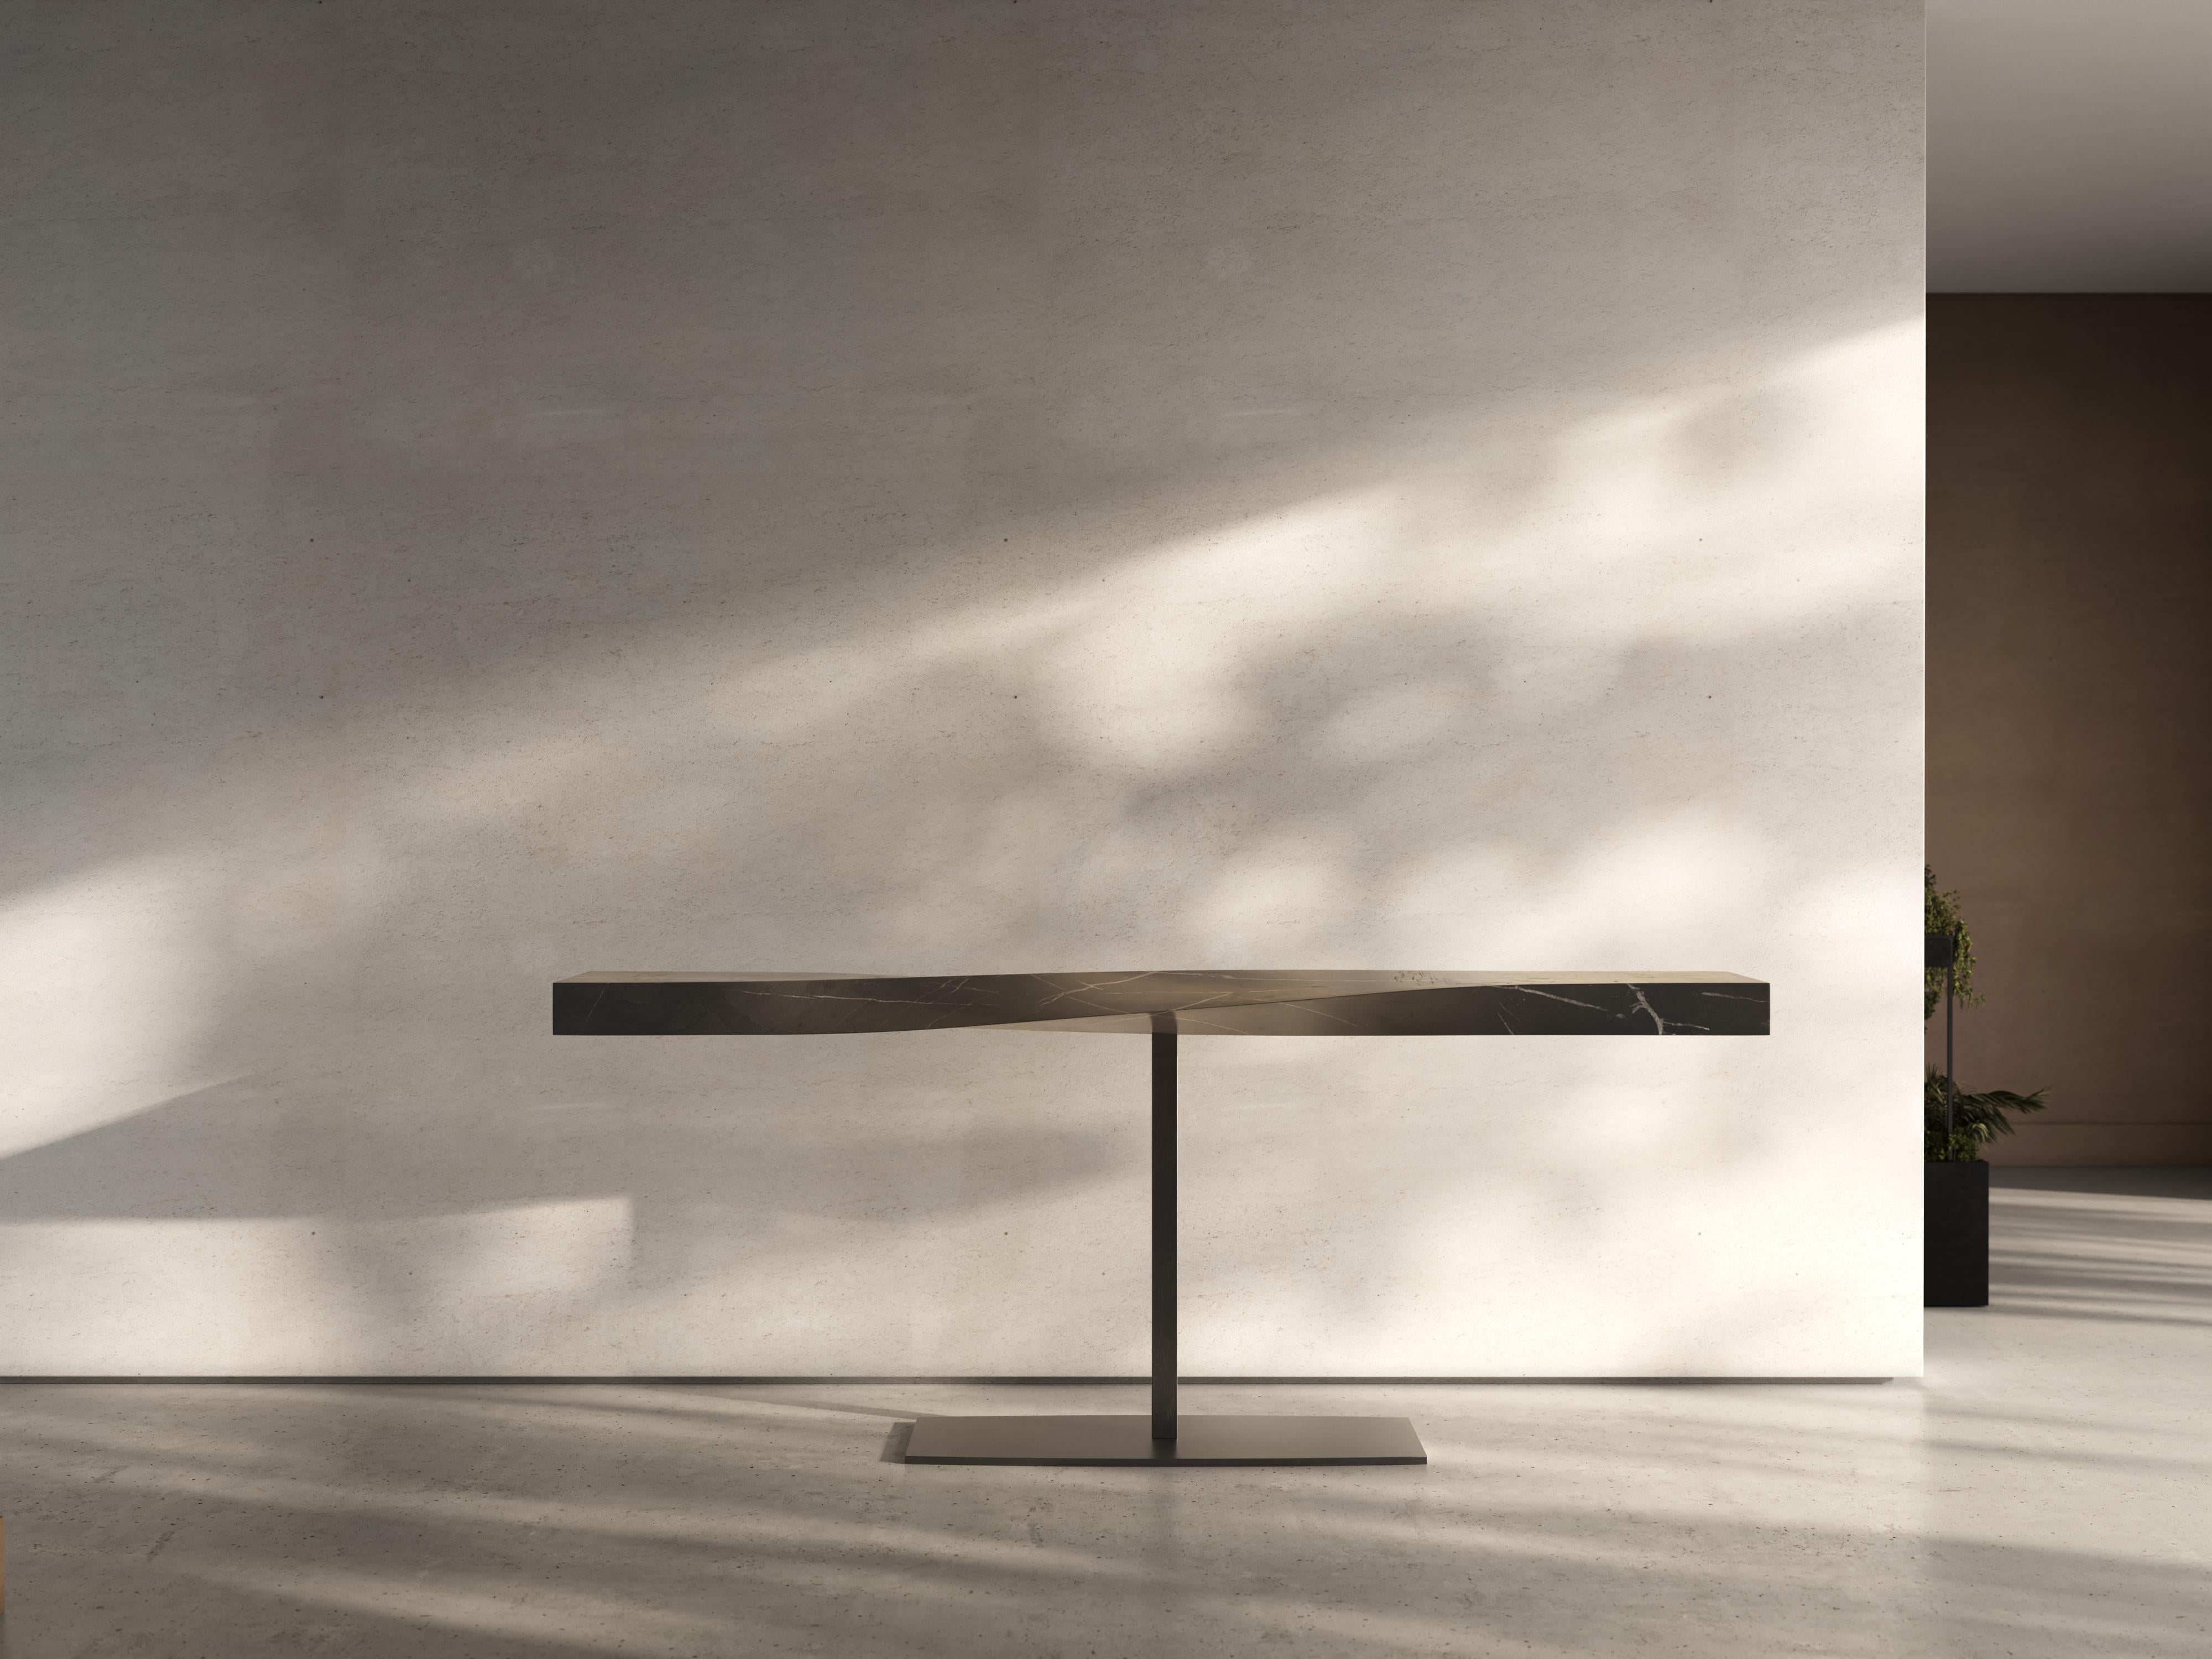 Soul console black marble by Veronica Mar
Dimensions: D200 x W50 x H90 cm
Materials: Marble Green/White Macael with stainless steel leg

SOUL SCULPTURE CONSOLE is available in from 1,5 meters up to 3 meters long.

Inspired by the spiral